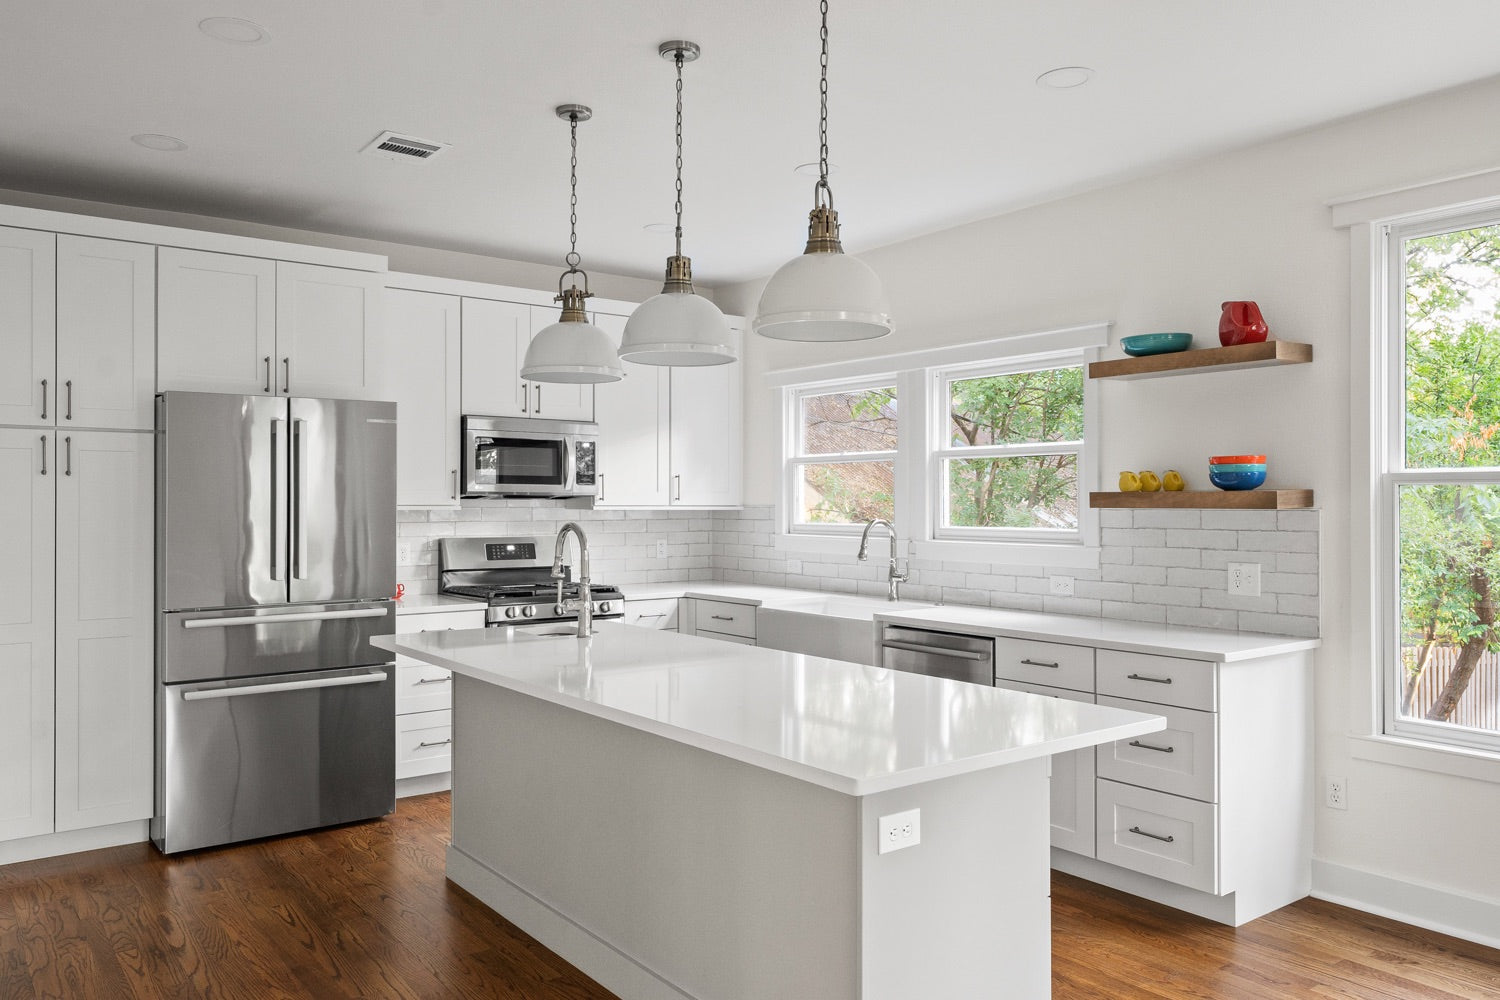 An all-white kitchen in Austin, Texas, showcasing a clean and bright design aesthetic. The kitchen features white cabinetry, countertops, and backsplash, creating a pristine and minimalist look. The natural light fills the space through large windows, illuminating the white surfaces and enhancing the sense of openness. The kitchen may include stainless steel appliances, a spacious island with seating, and sleek pendant lights. The all-white color scheme creates a timeless and refreshing atmosphere, perfect for culinary creativity and gatherings with family and friends. This all-white kitchen in Austin, Texas, combines modern elegance with a touch of Southern charm.